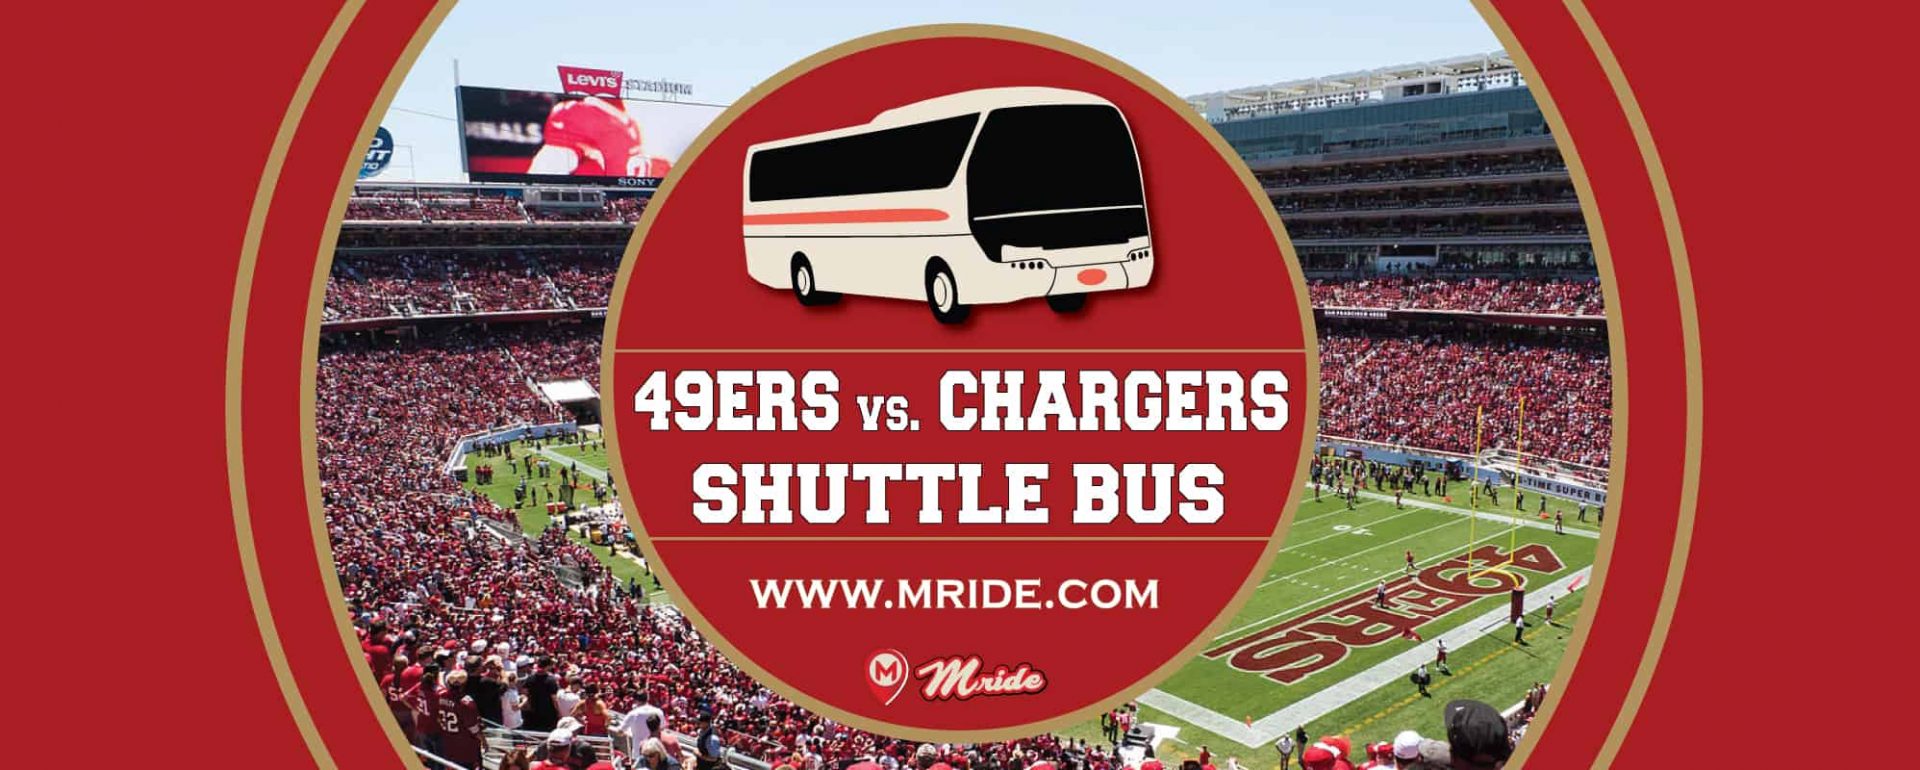 49ers vs. Chargers Shuttle Bus